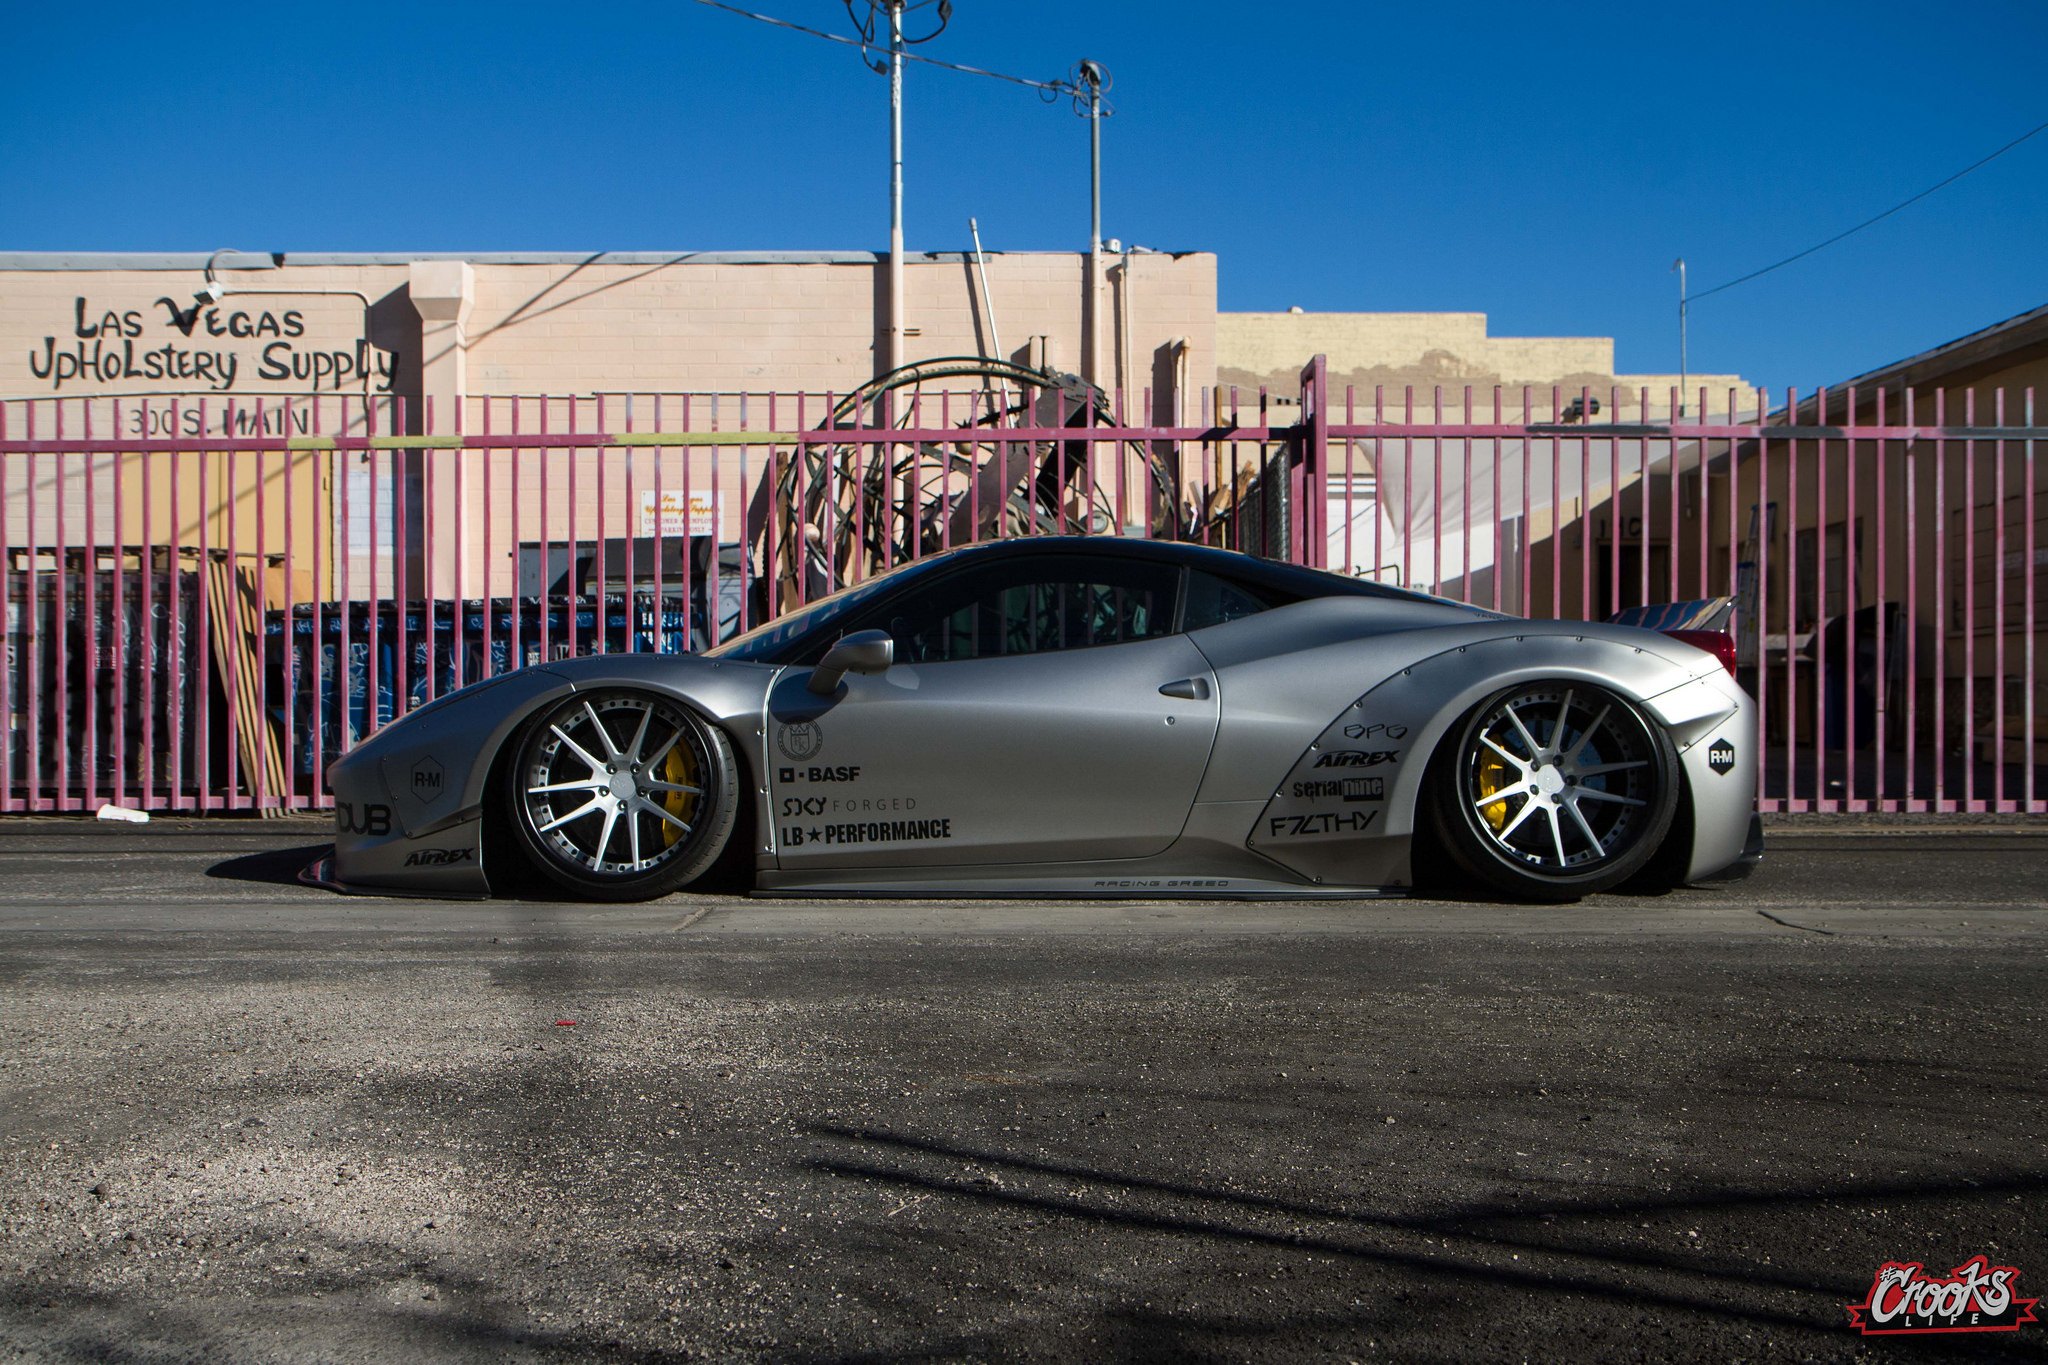 Gray Debadged Ferrari 458 with Aftermarket Fender Flares - Photo by Jimmy Crook